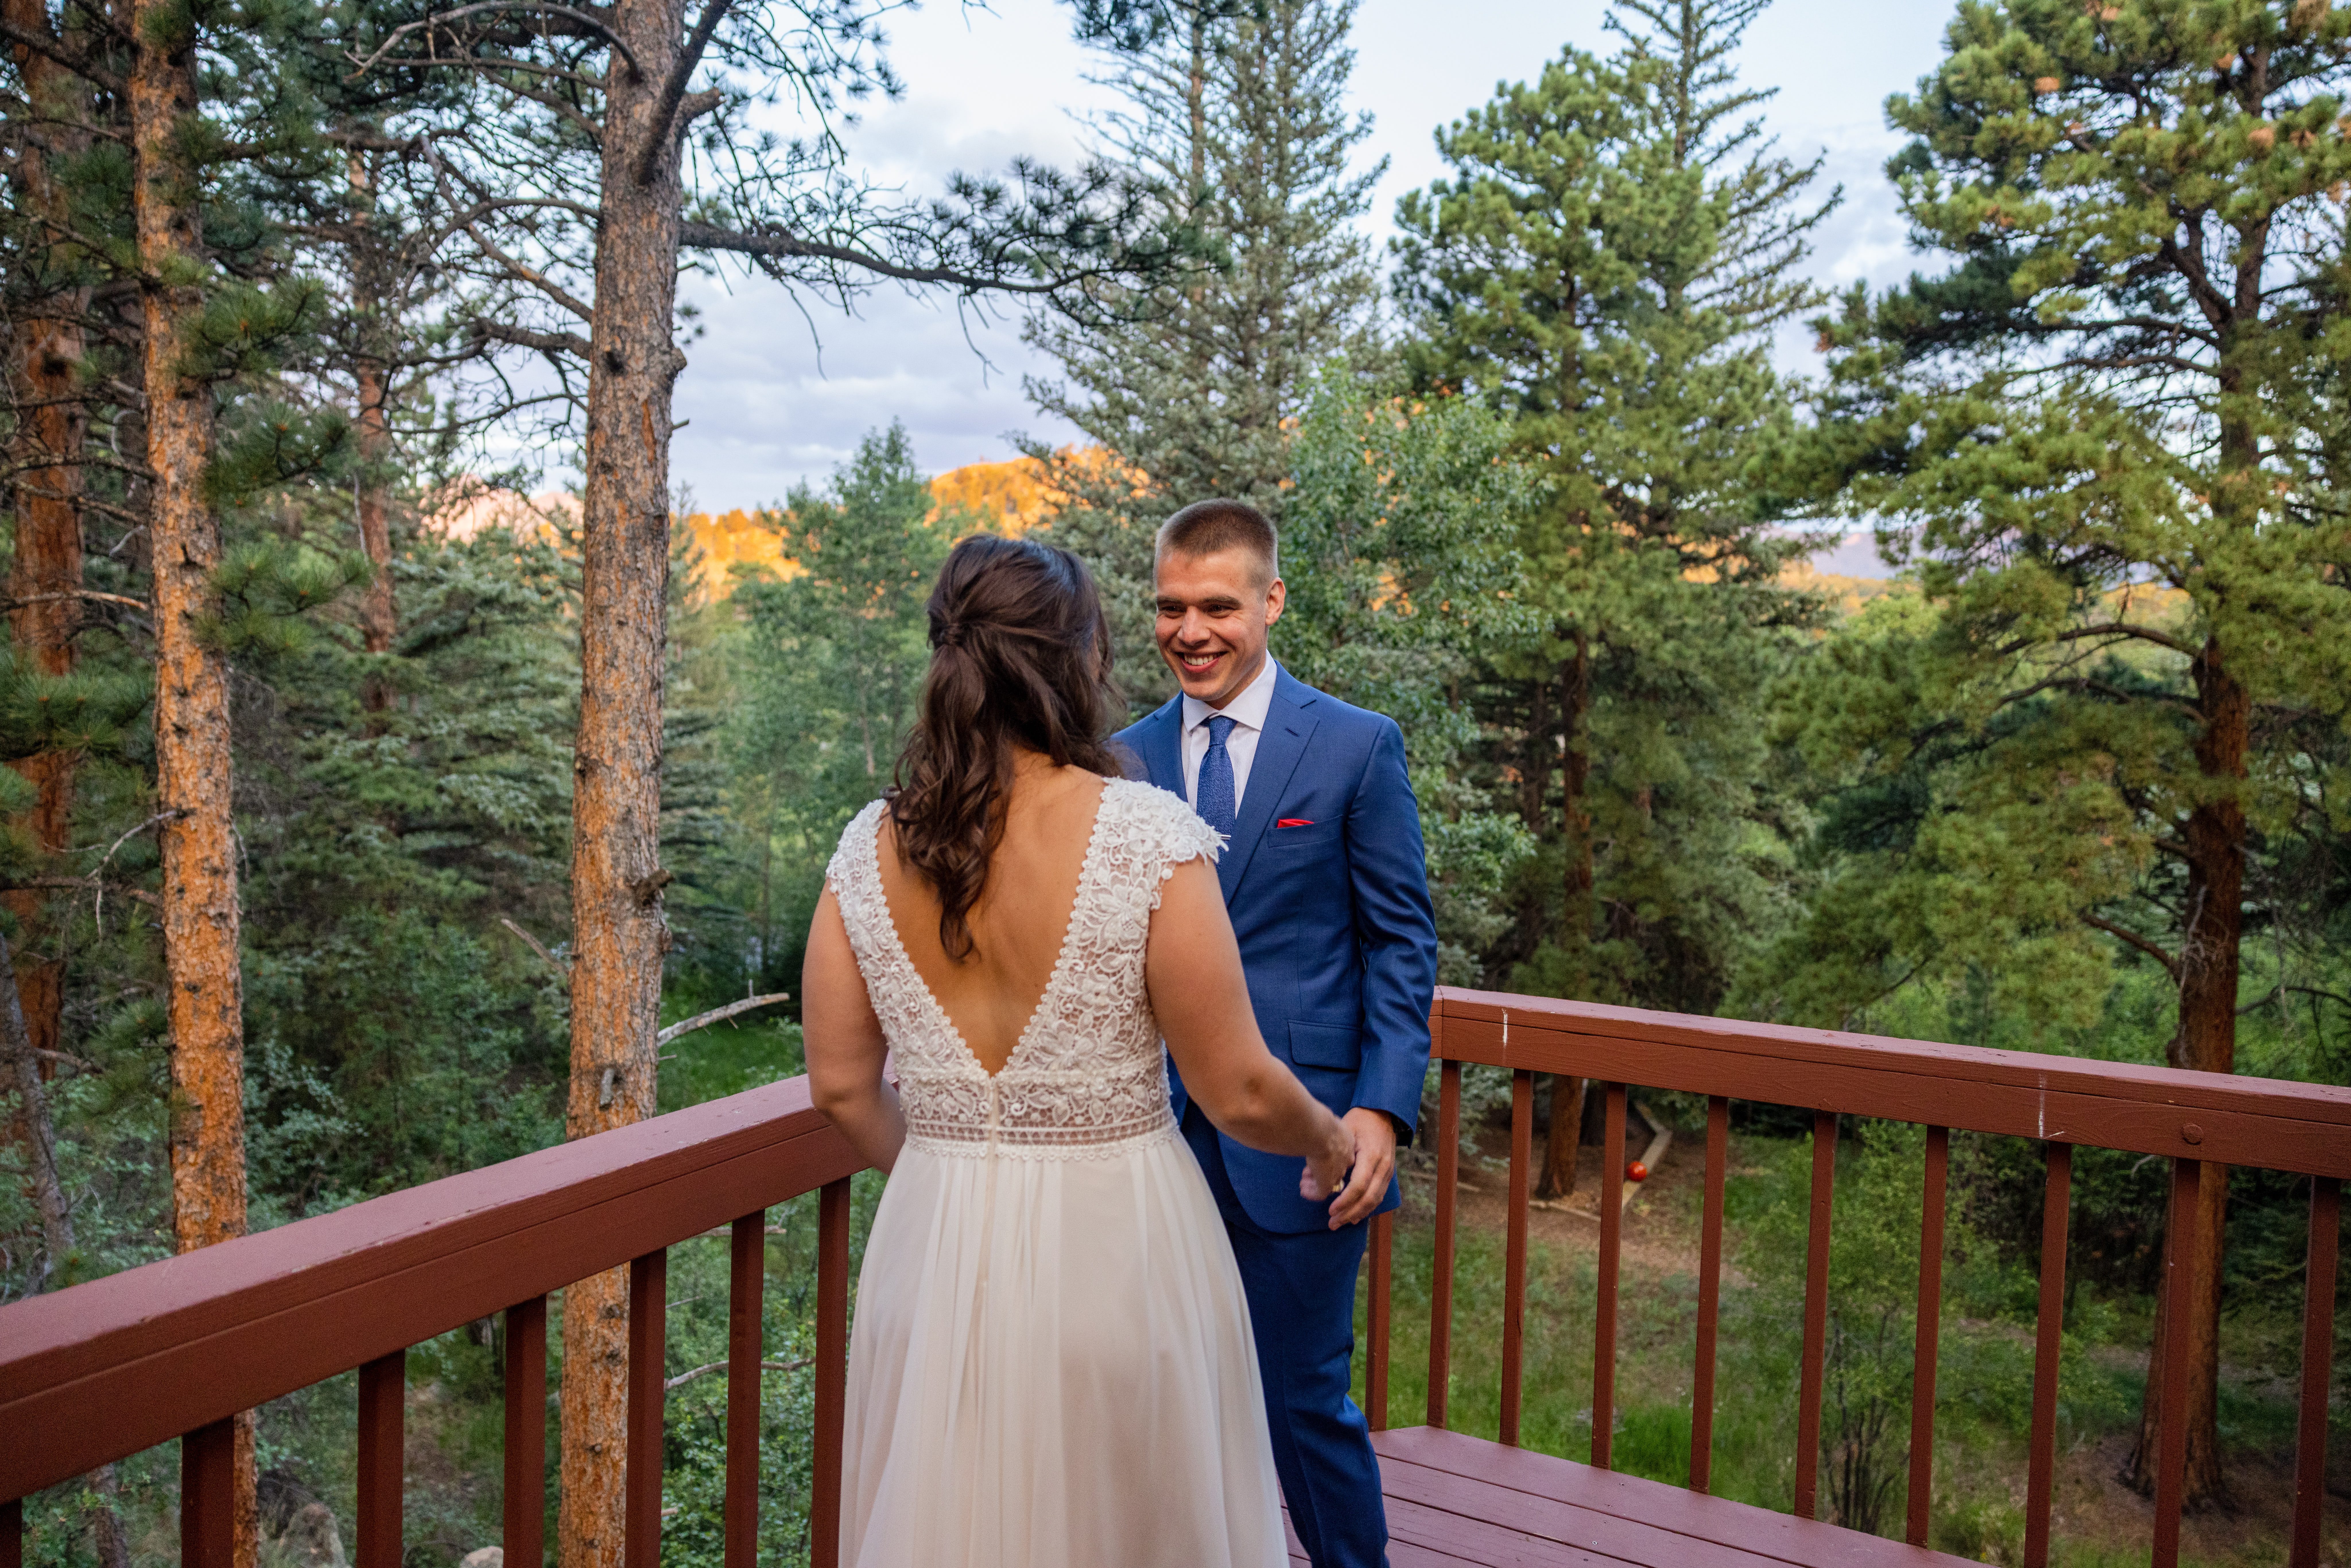 The bride and groom share a first look on their wedding day at Romantic RiverSong Inn in Estes Park